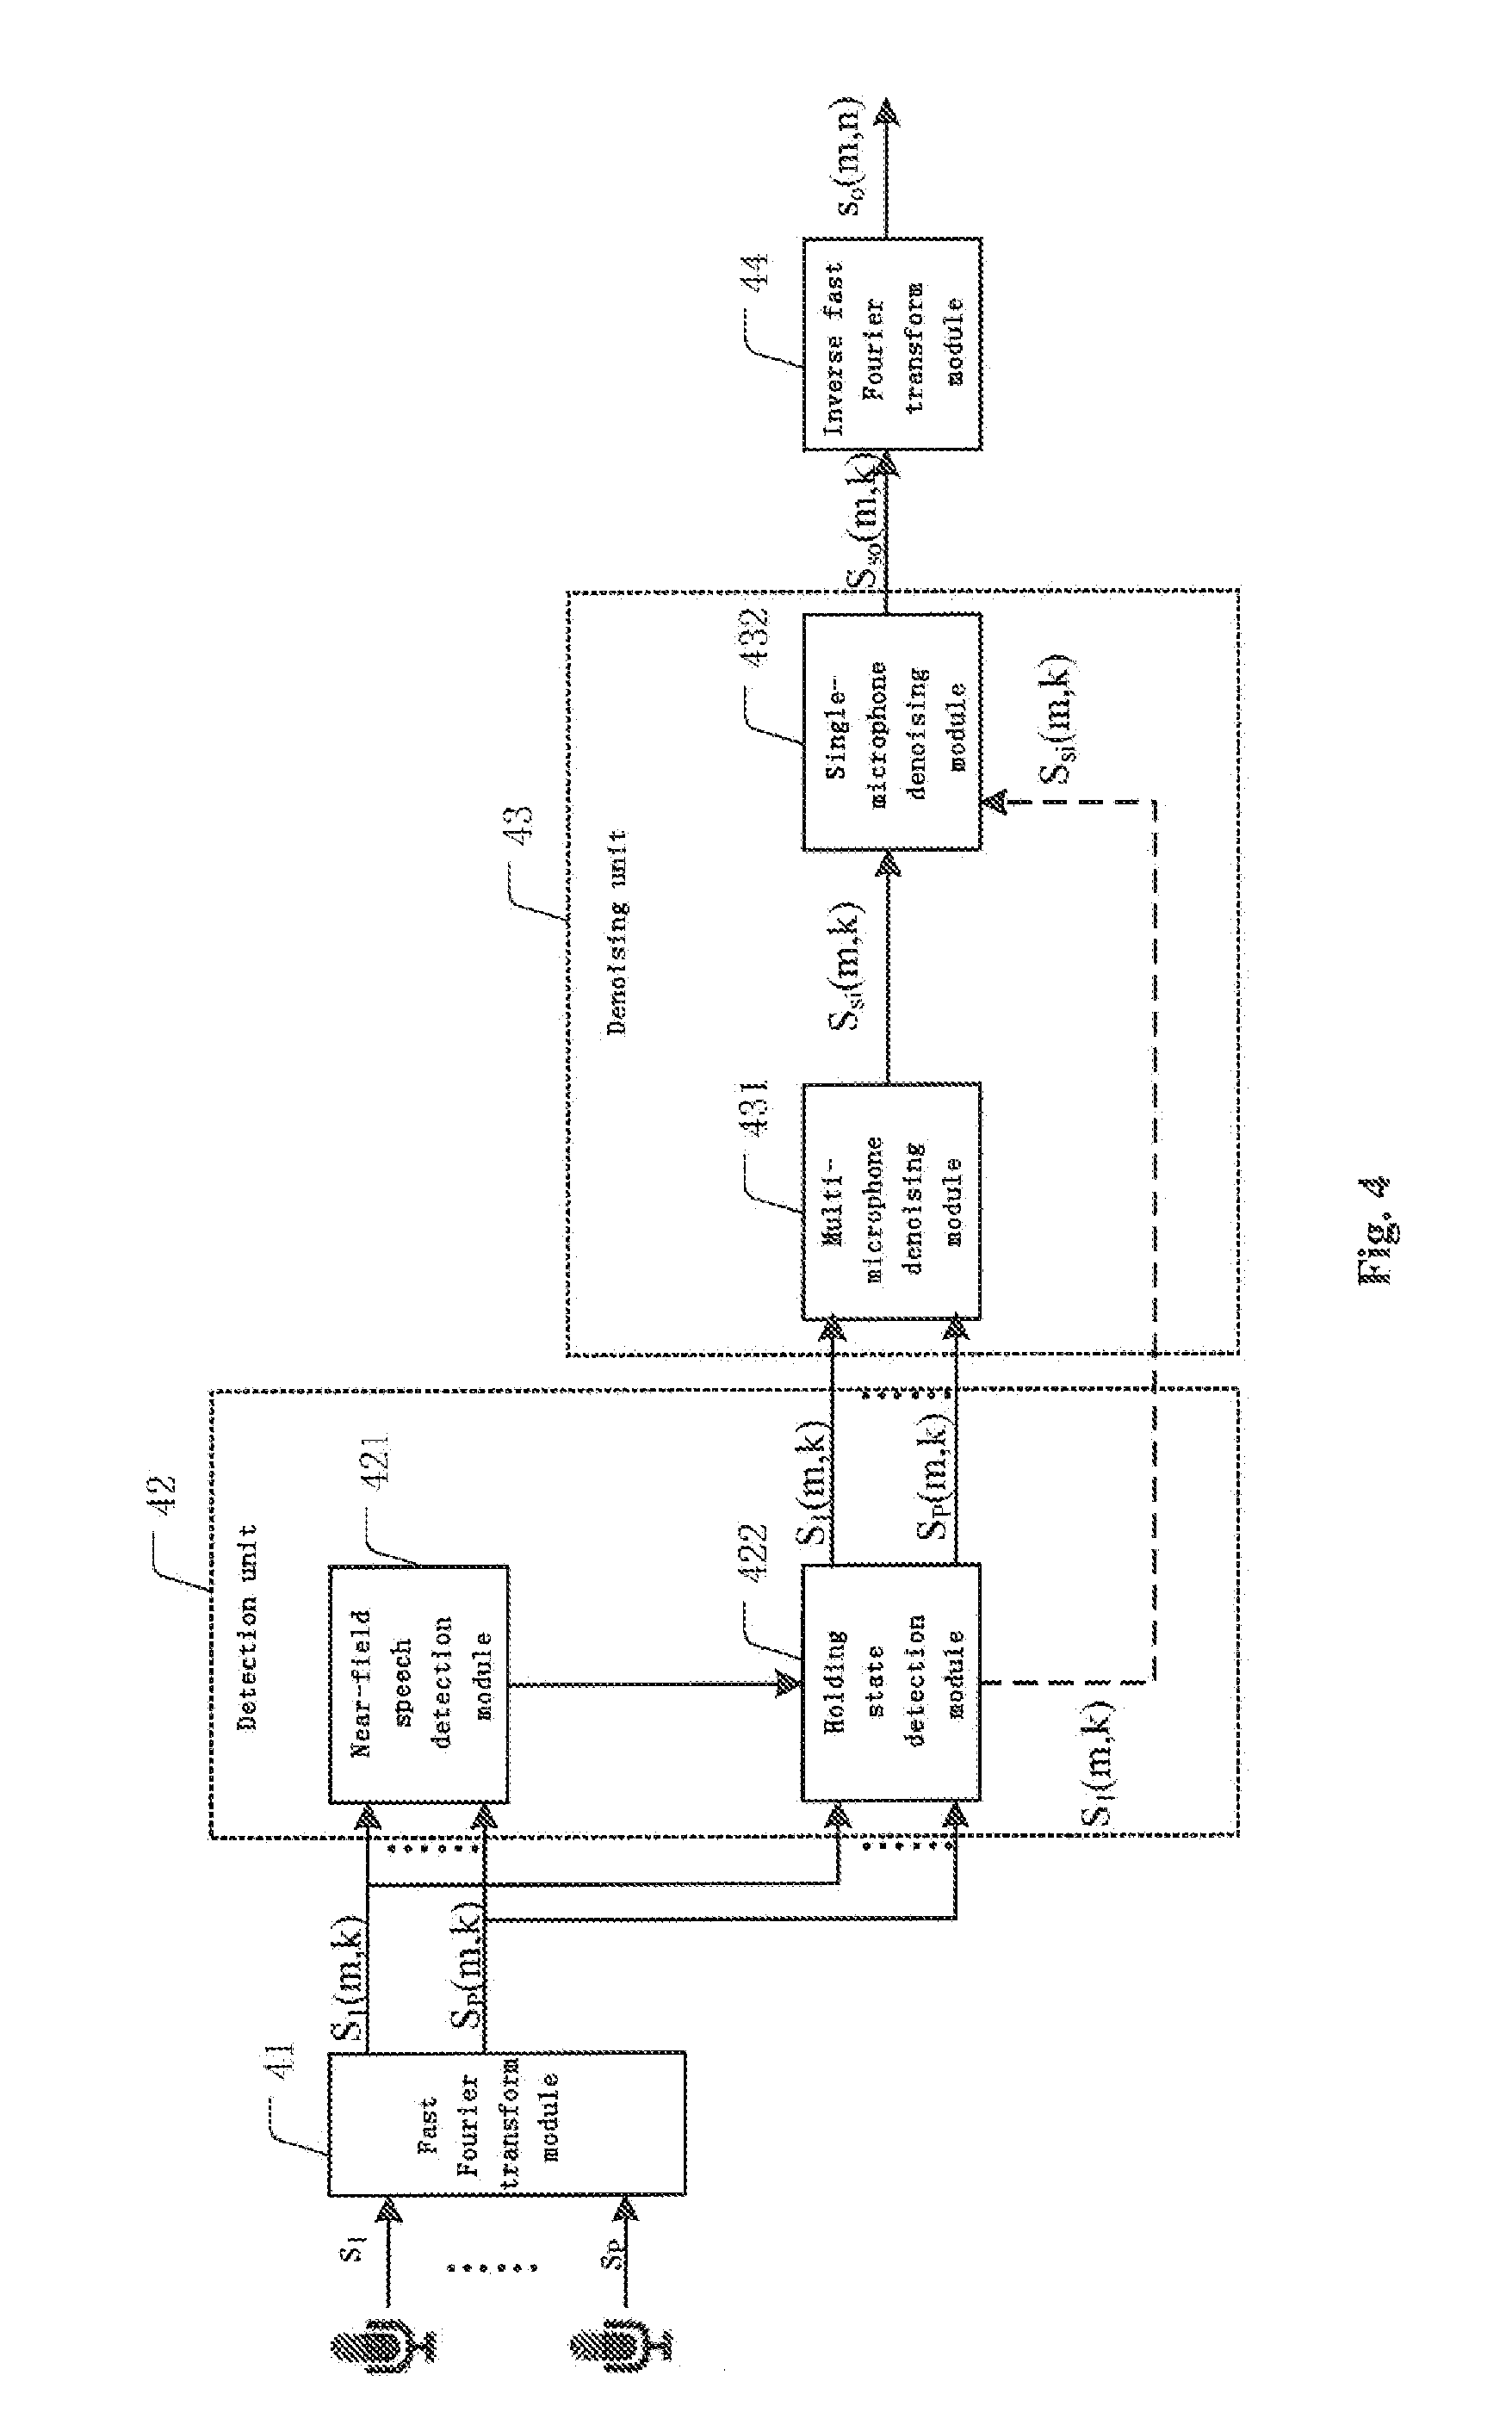 Speech enhancement method and device for mobile phones